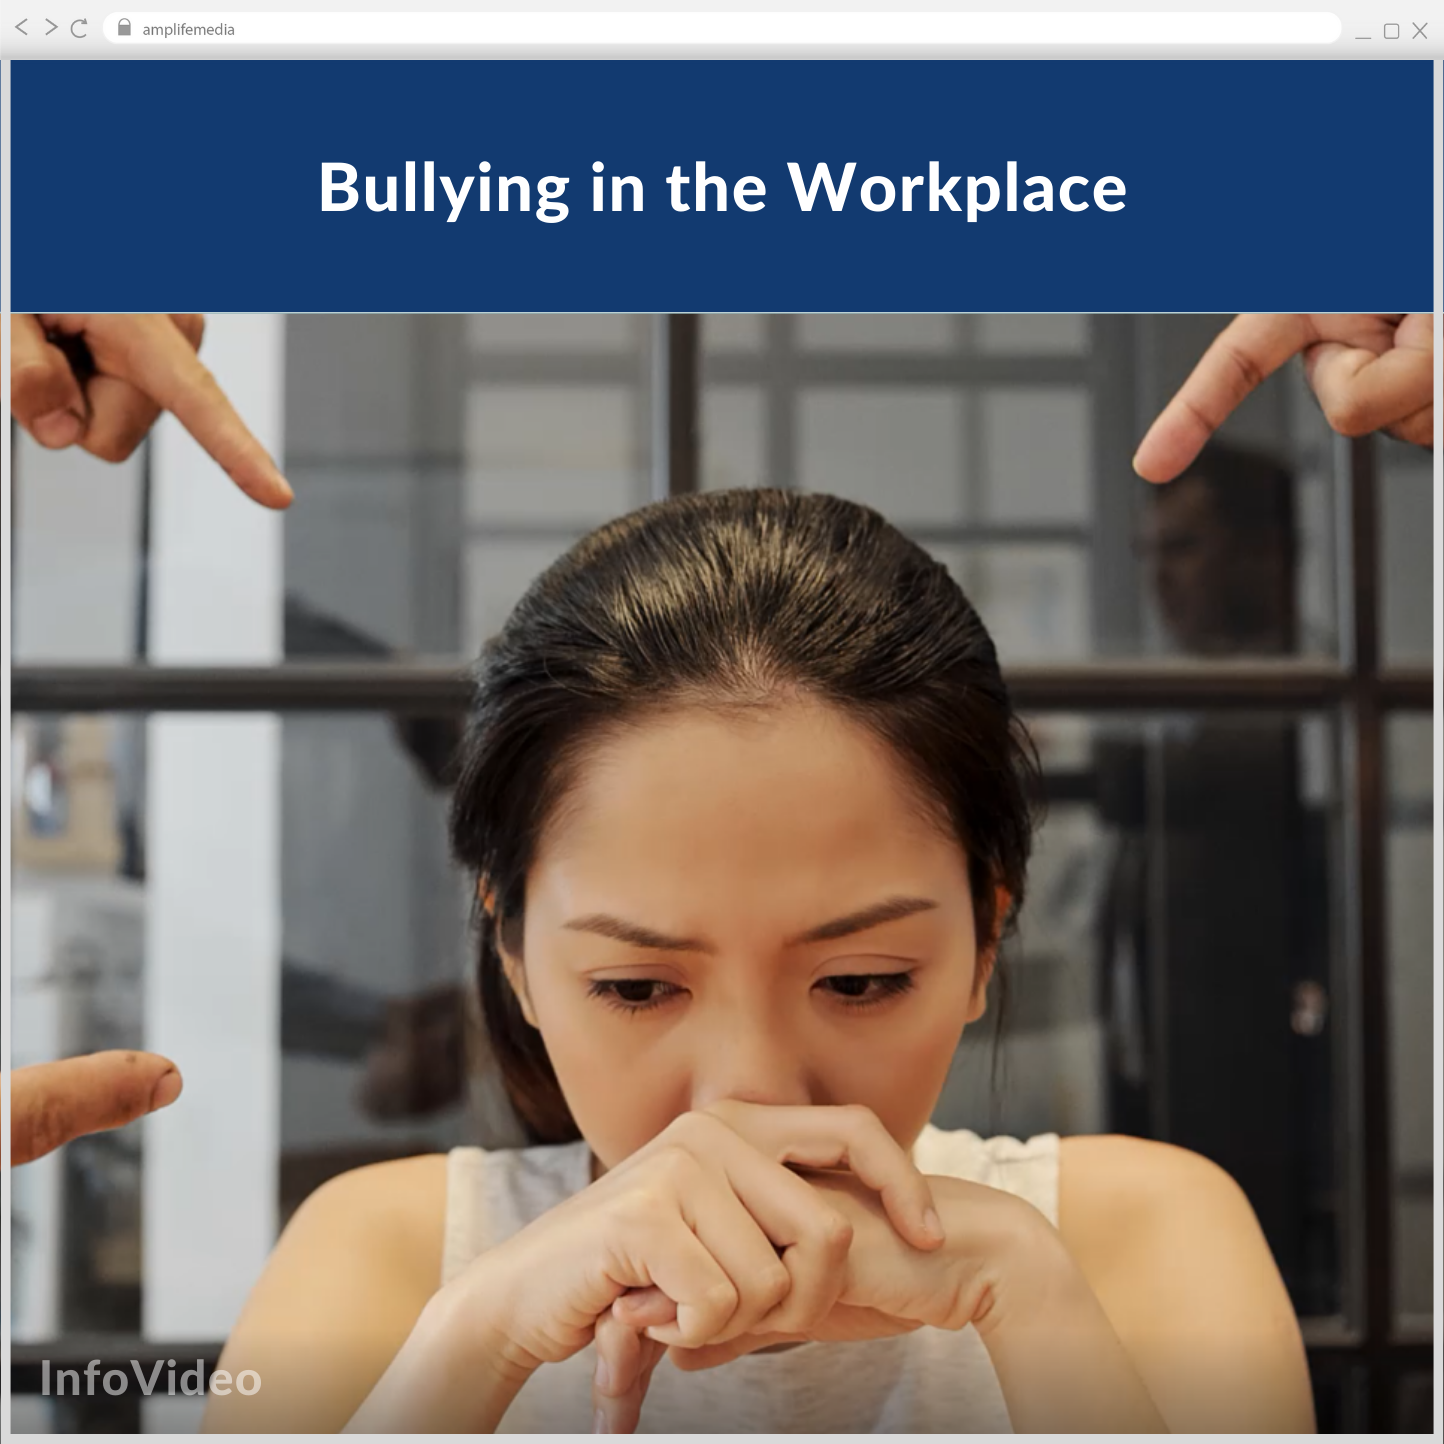 Subscription to Wellbeing Media: Bullying in the Workplace IV 521